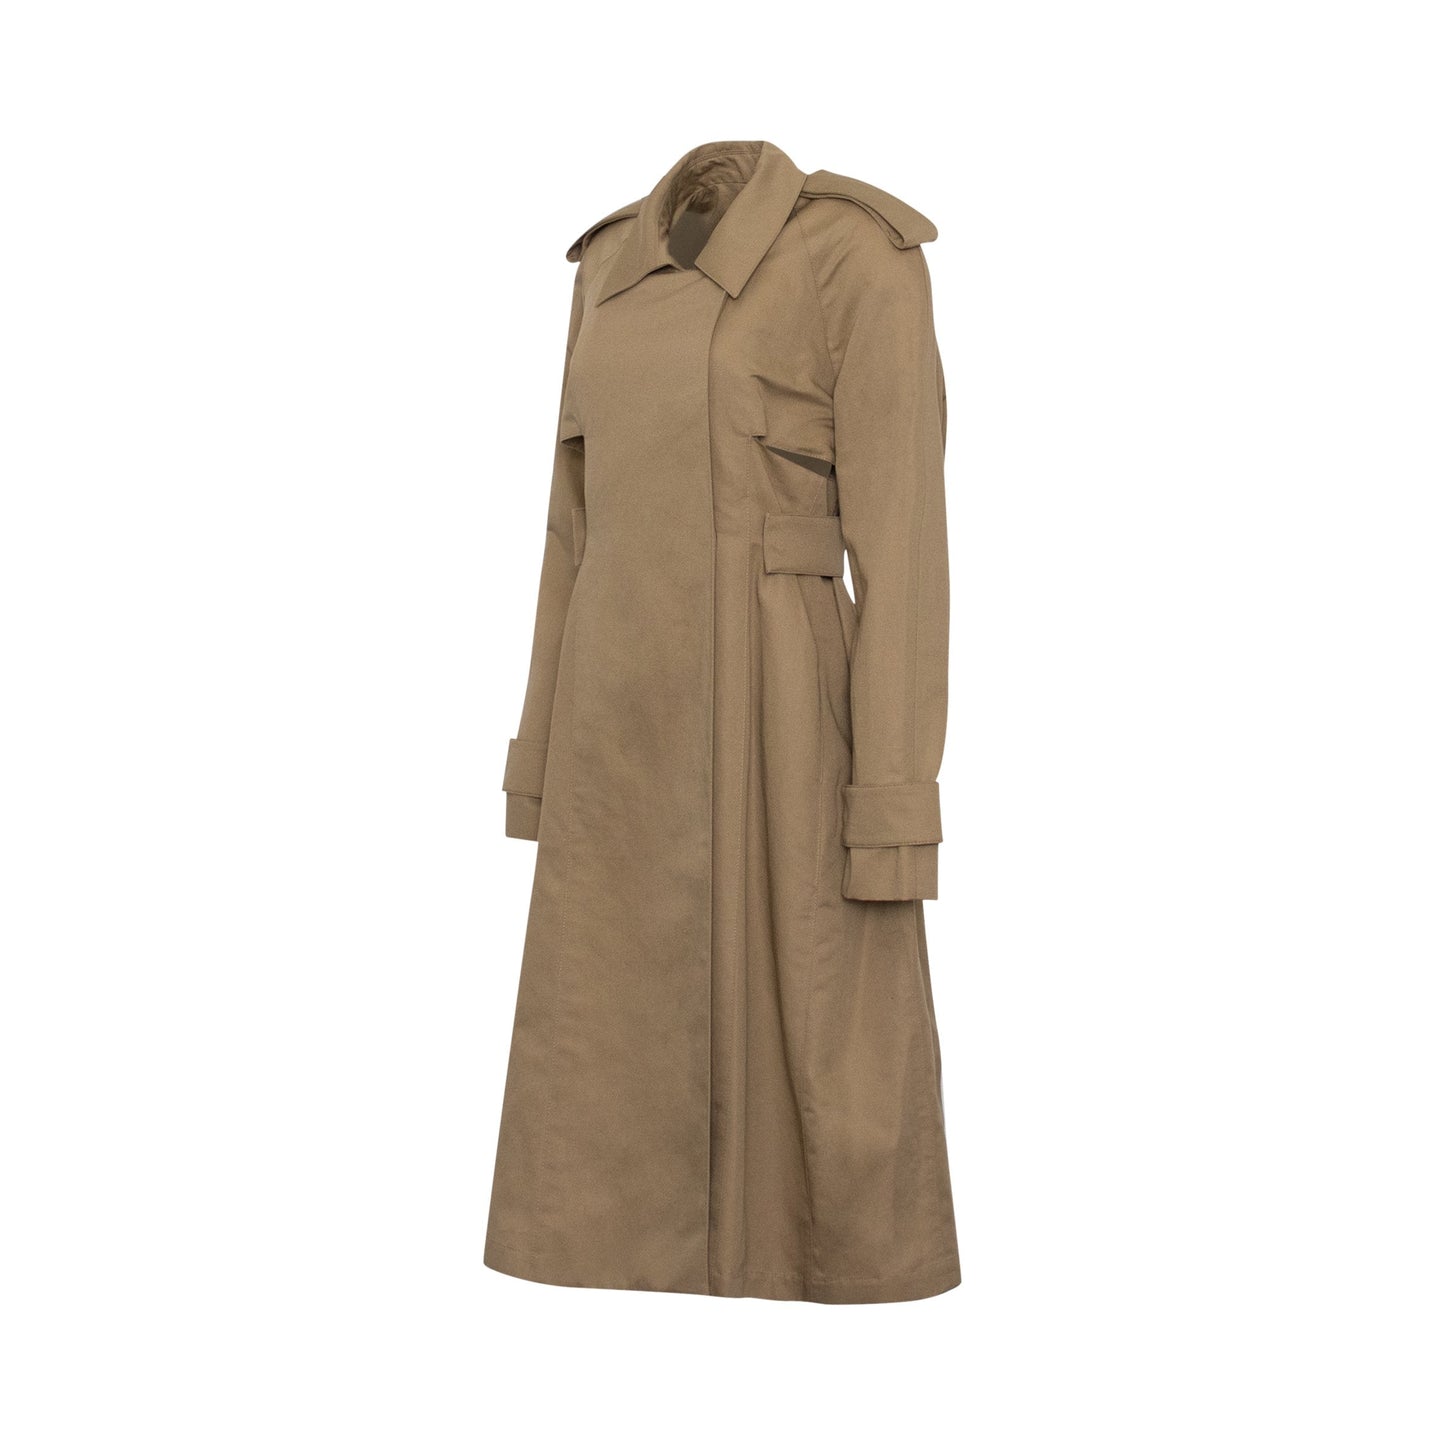 Cut Out Trench Coat in Beige